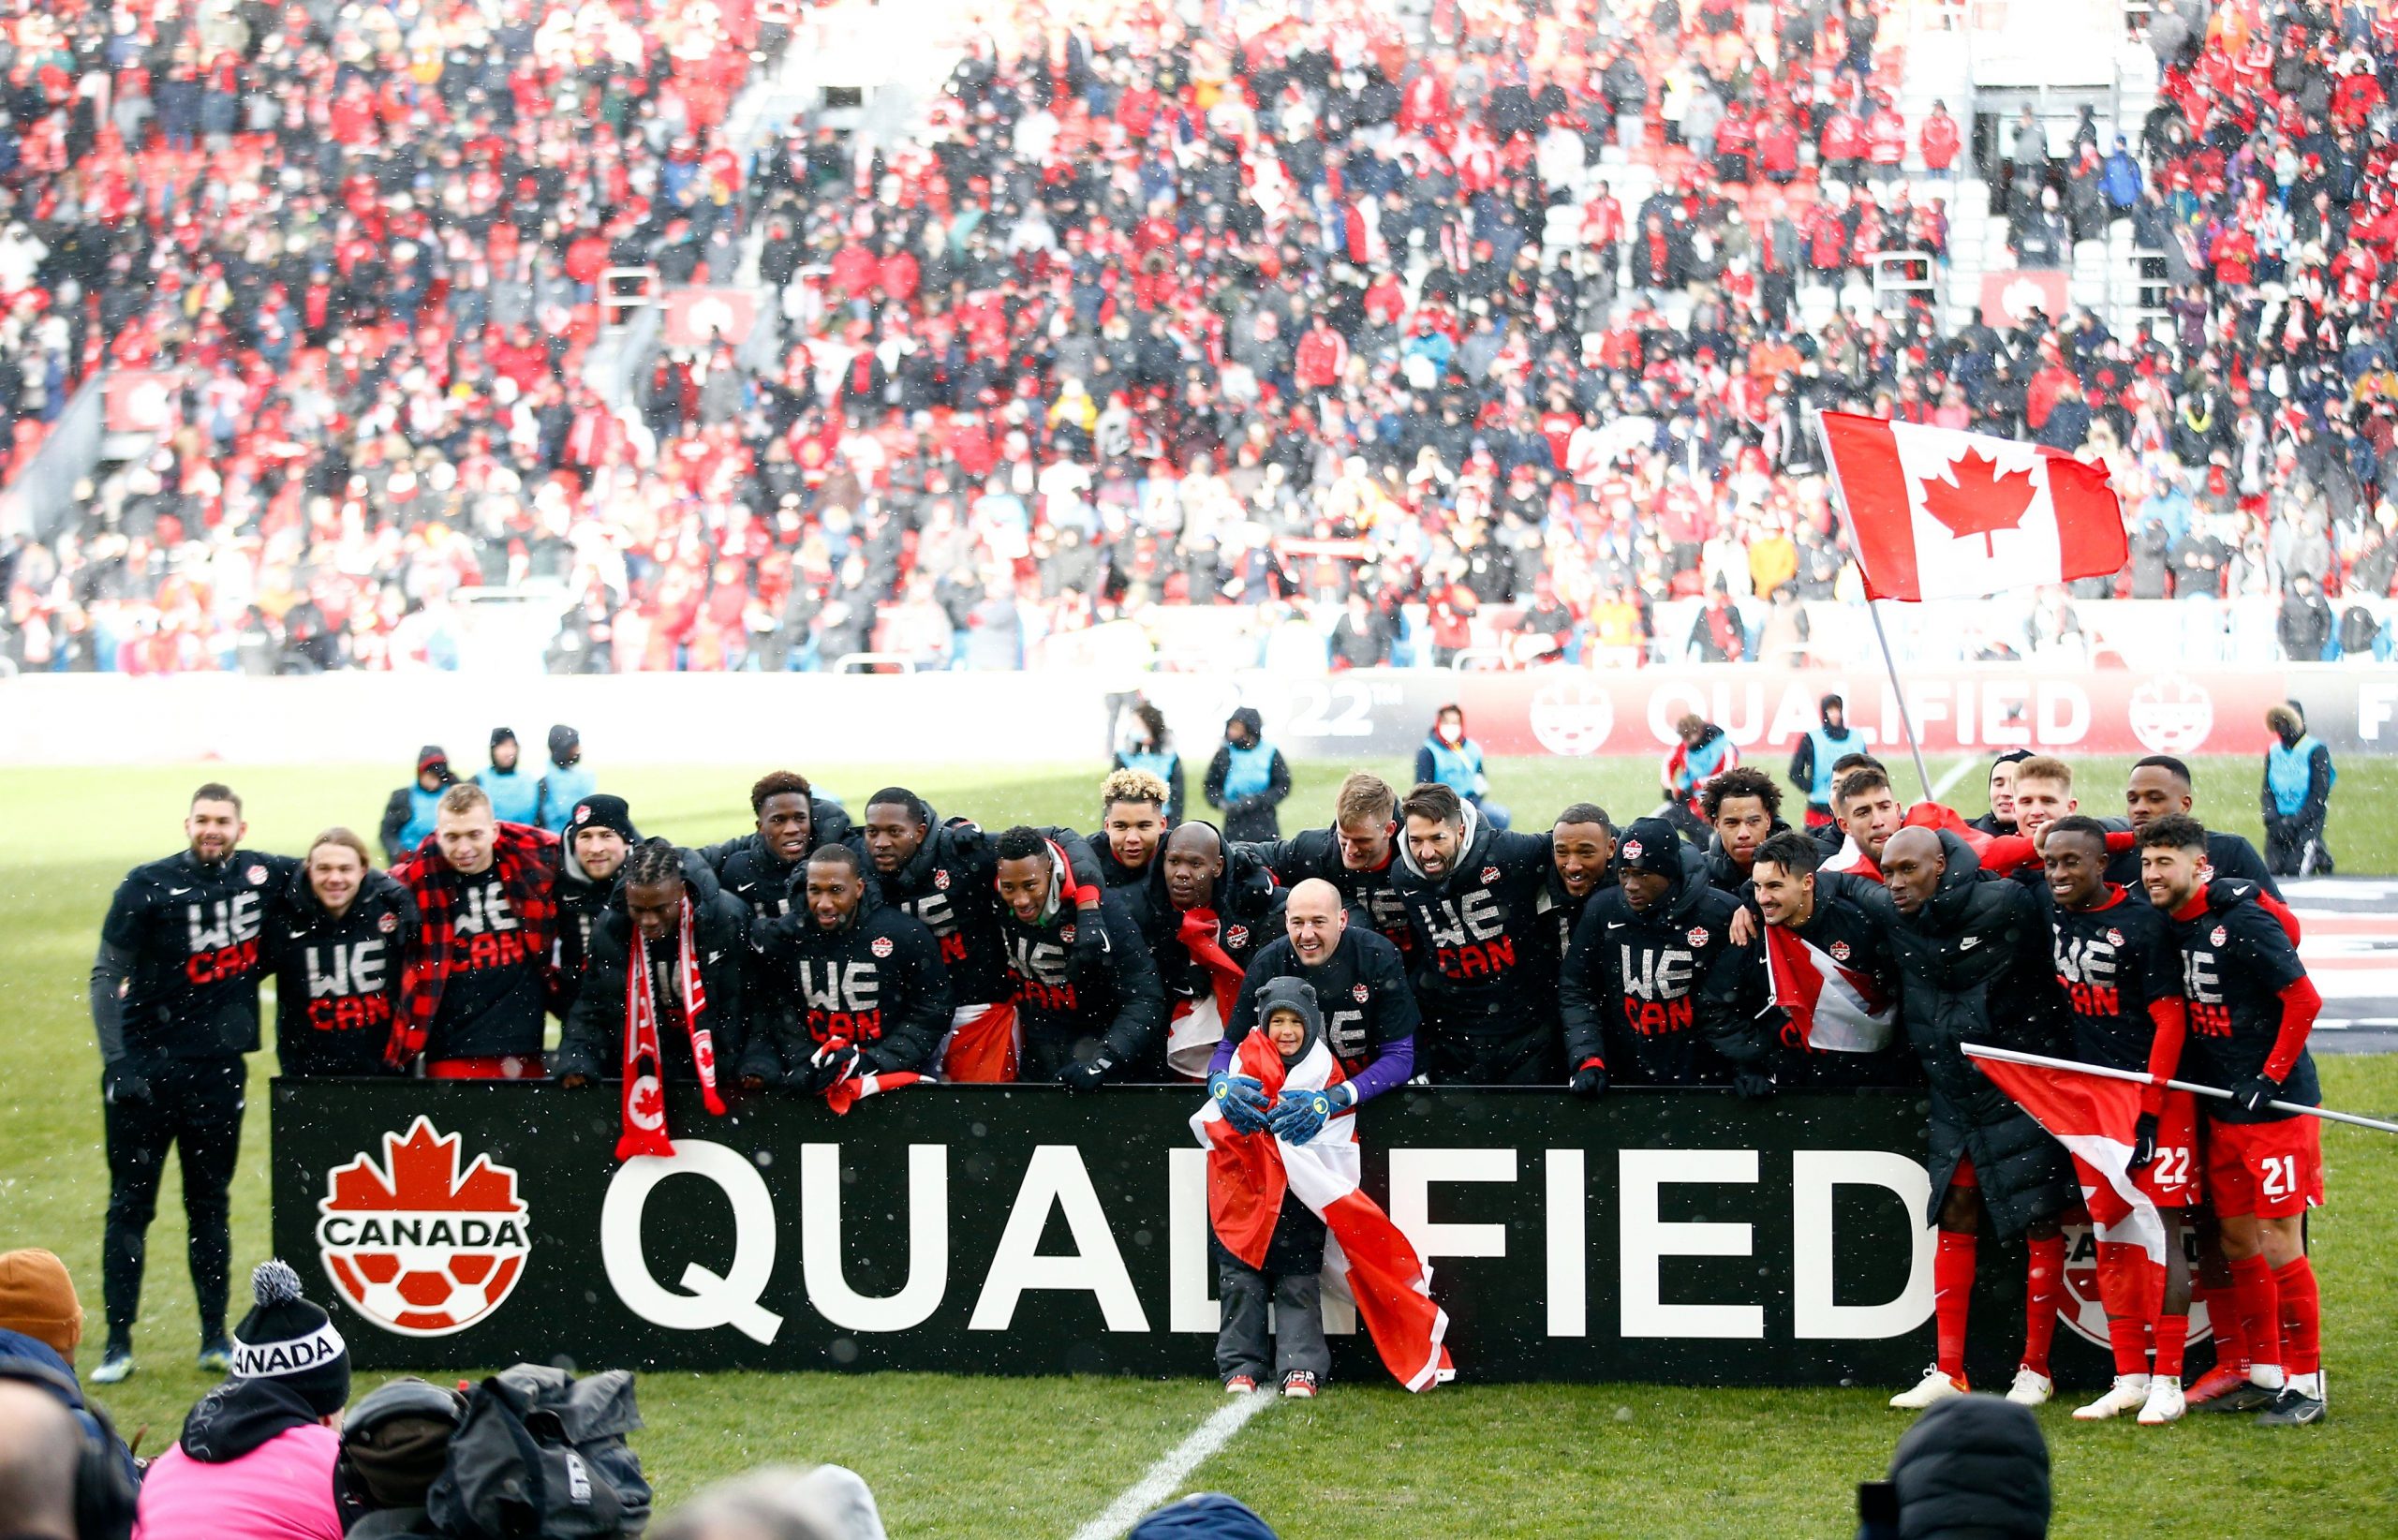 Canada in World Cup for the first time in 36 years with many players injured